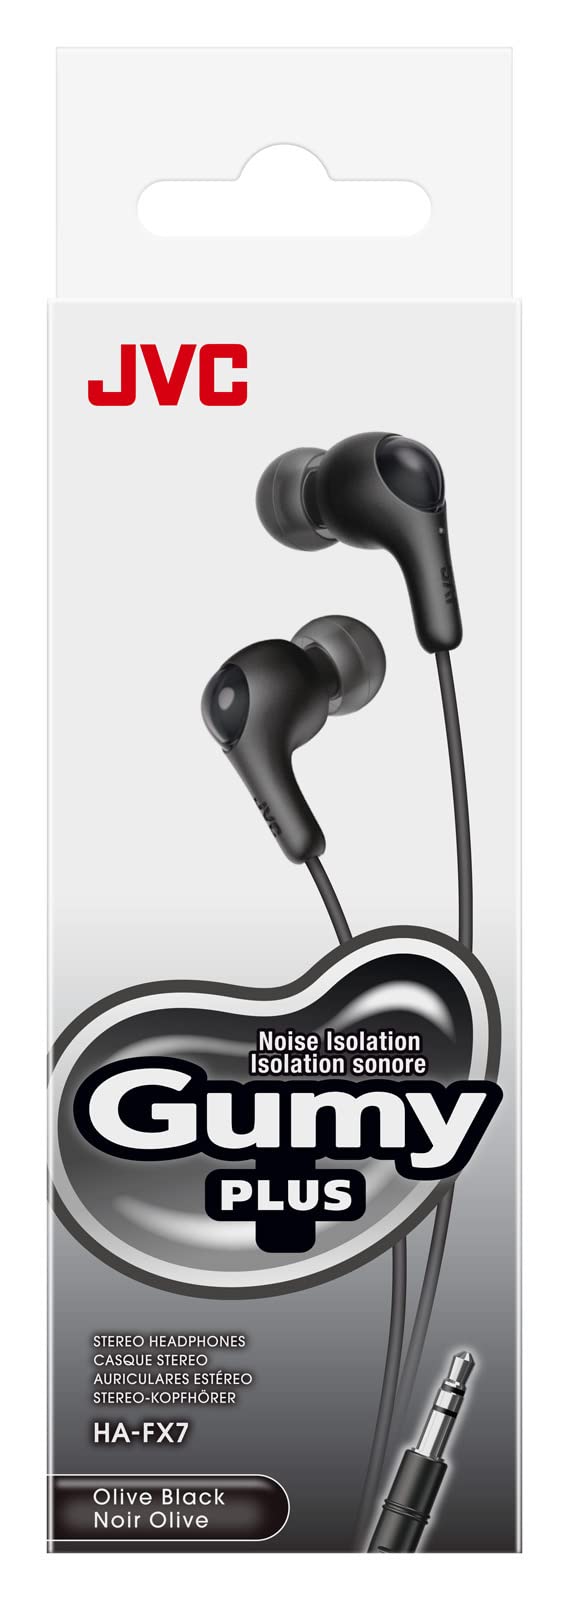 JVC Gumy in Ear Earbud Headphones with Paper Package, Powerful Sound, Comfortable and Secure Fit, Silicone Ear Pieces S/M/L - HAFX7BN (Black)